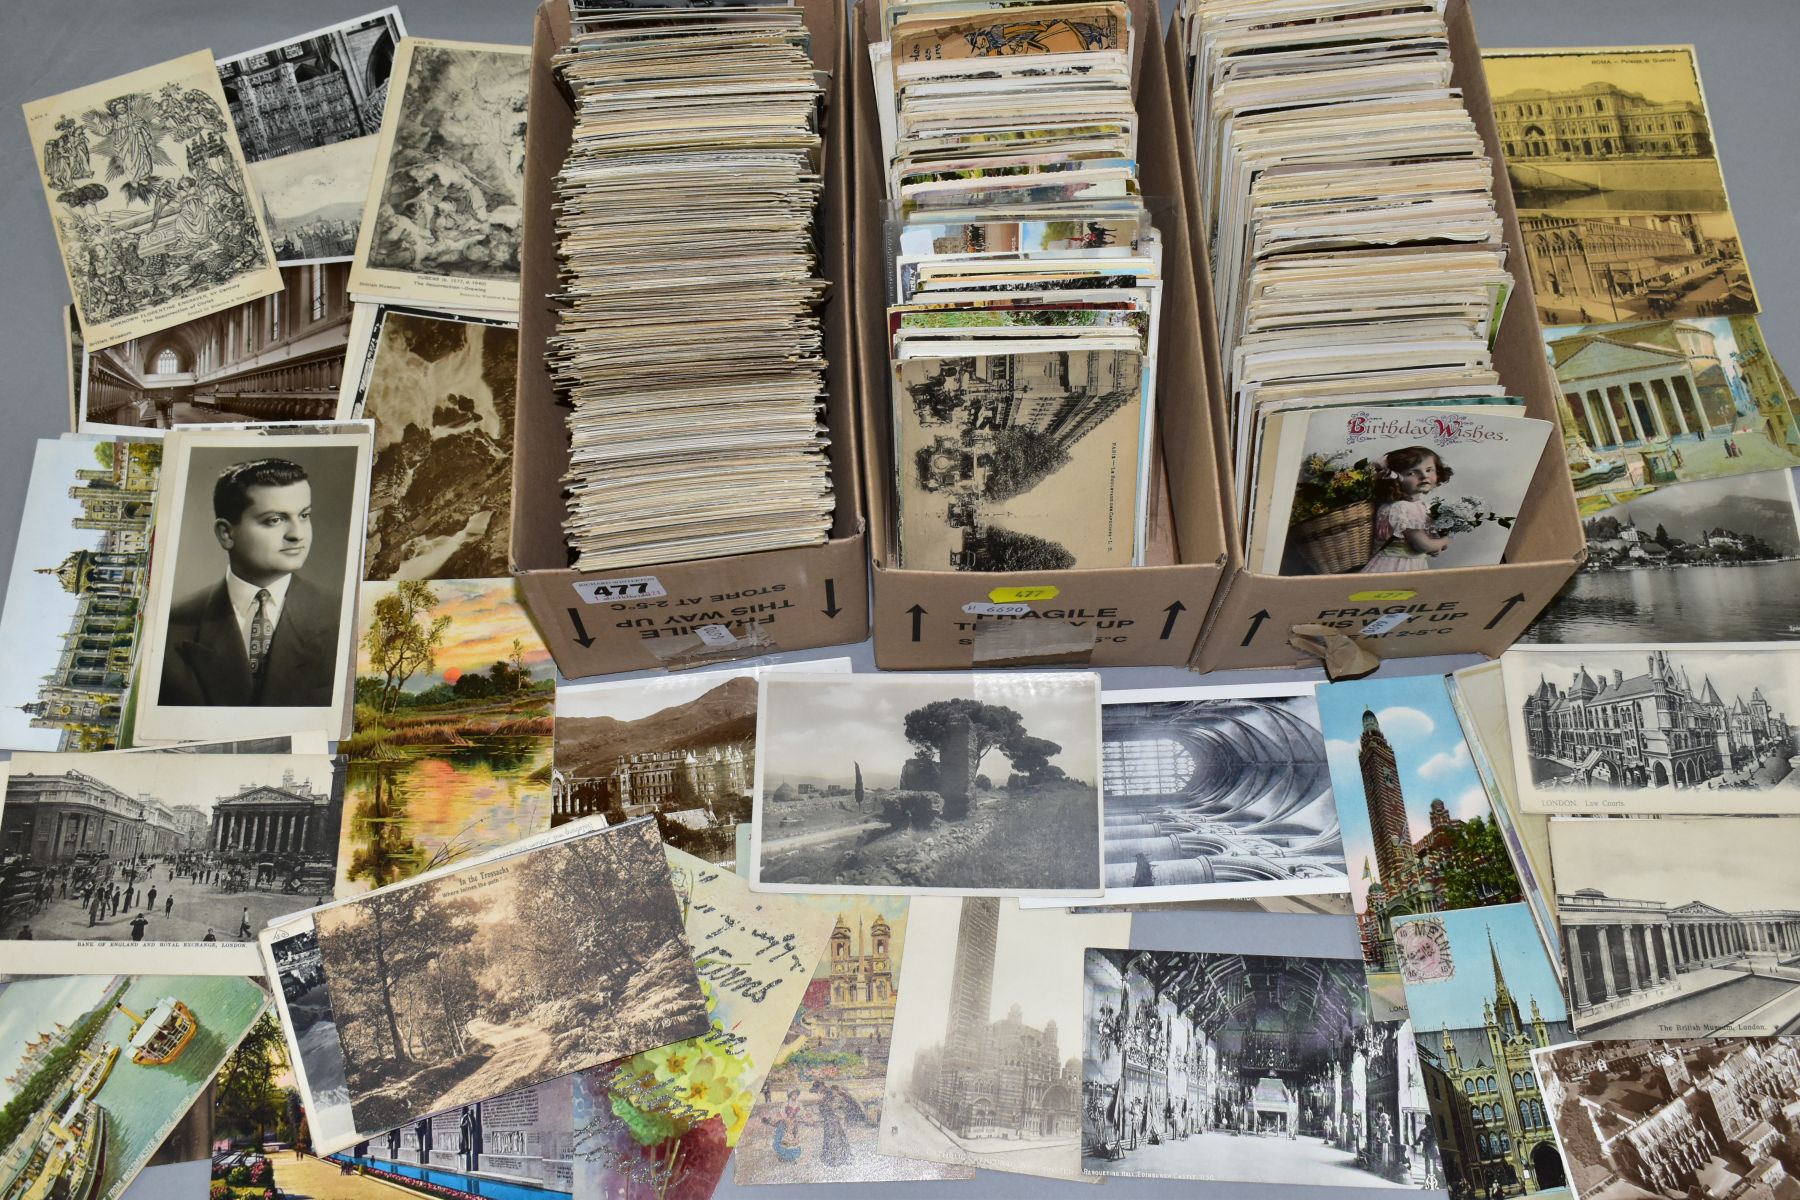 POSTCARDS, approximately 1400-1500 postcards in three small boxes containing predominantly early